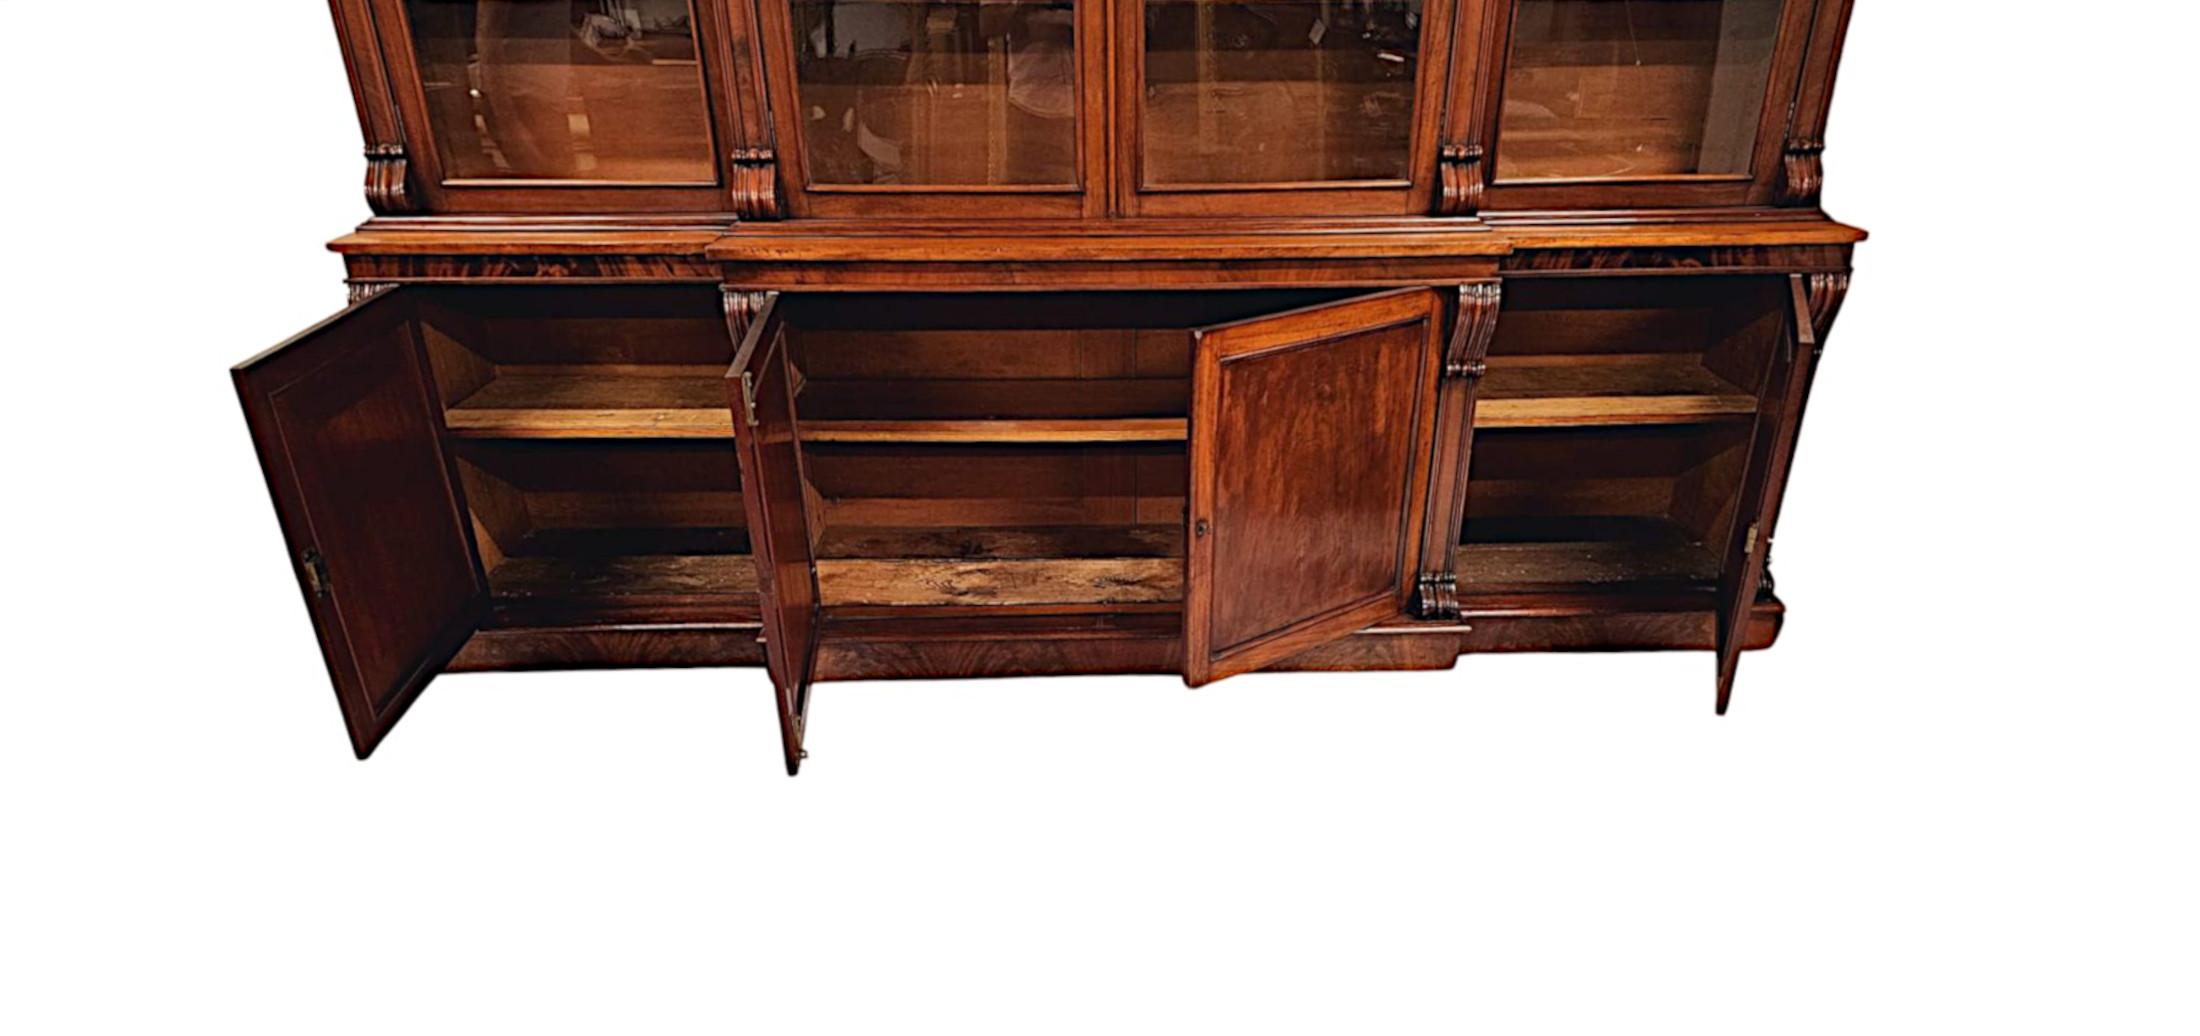 A Very Rare 19th Century Irish Breakfront Bookcase Labelled 'Strahan of Dublin' For Sale 7